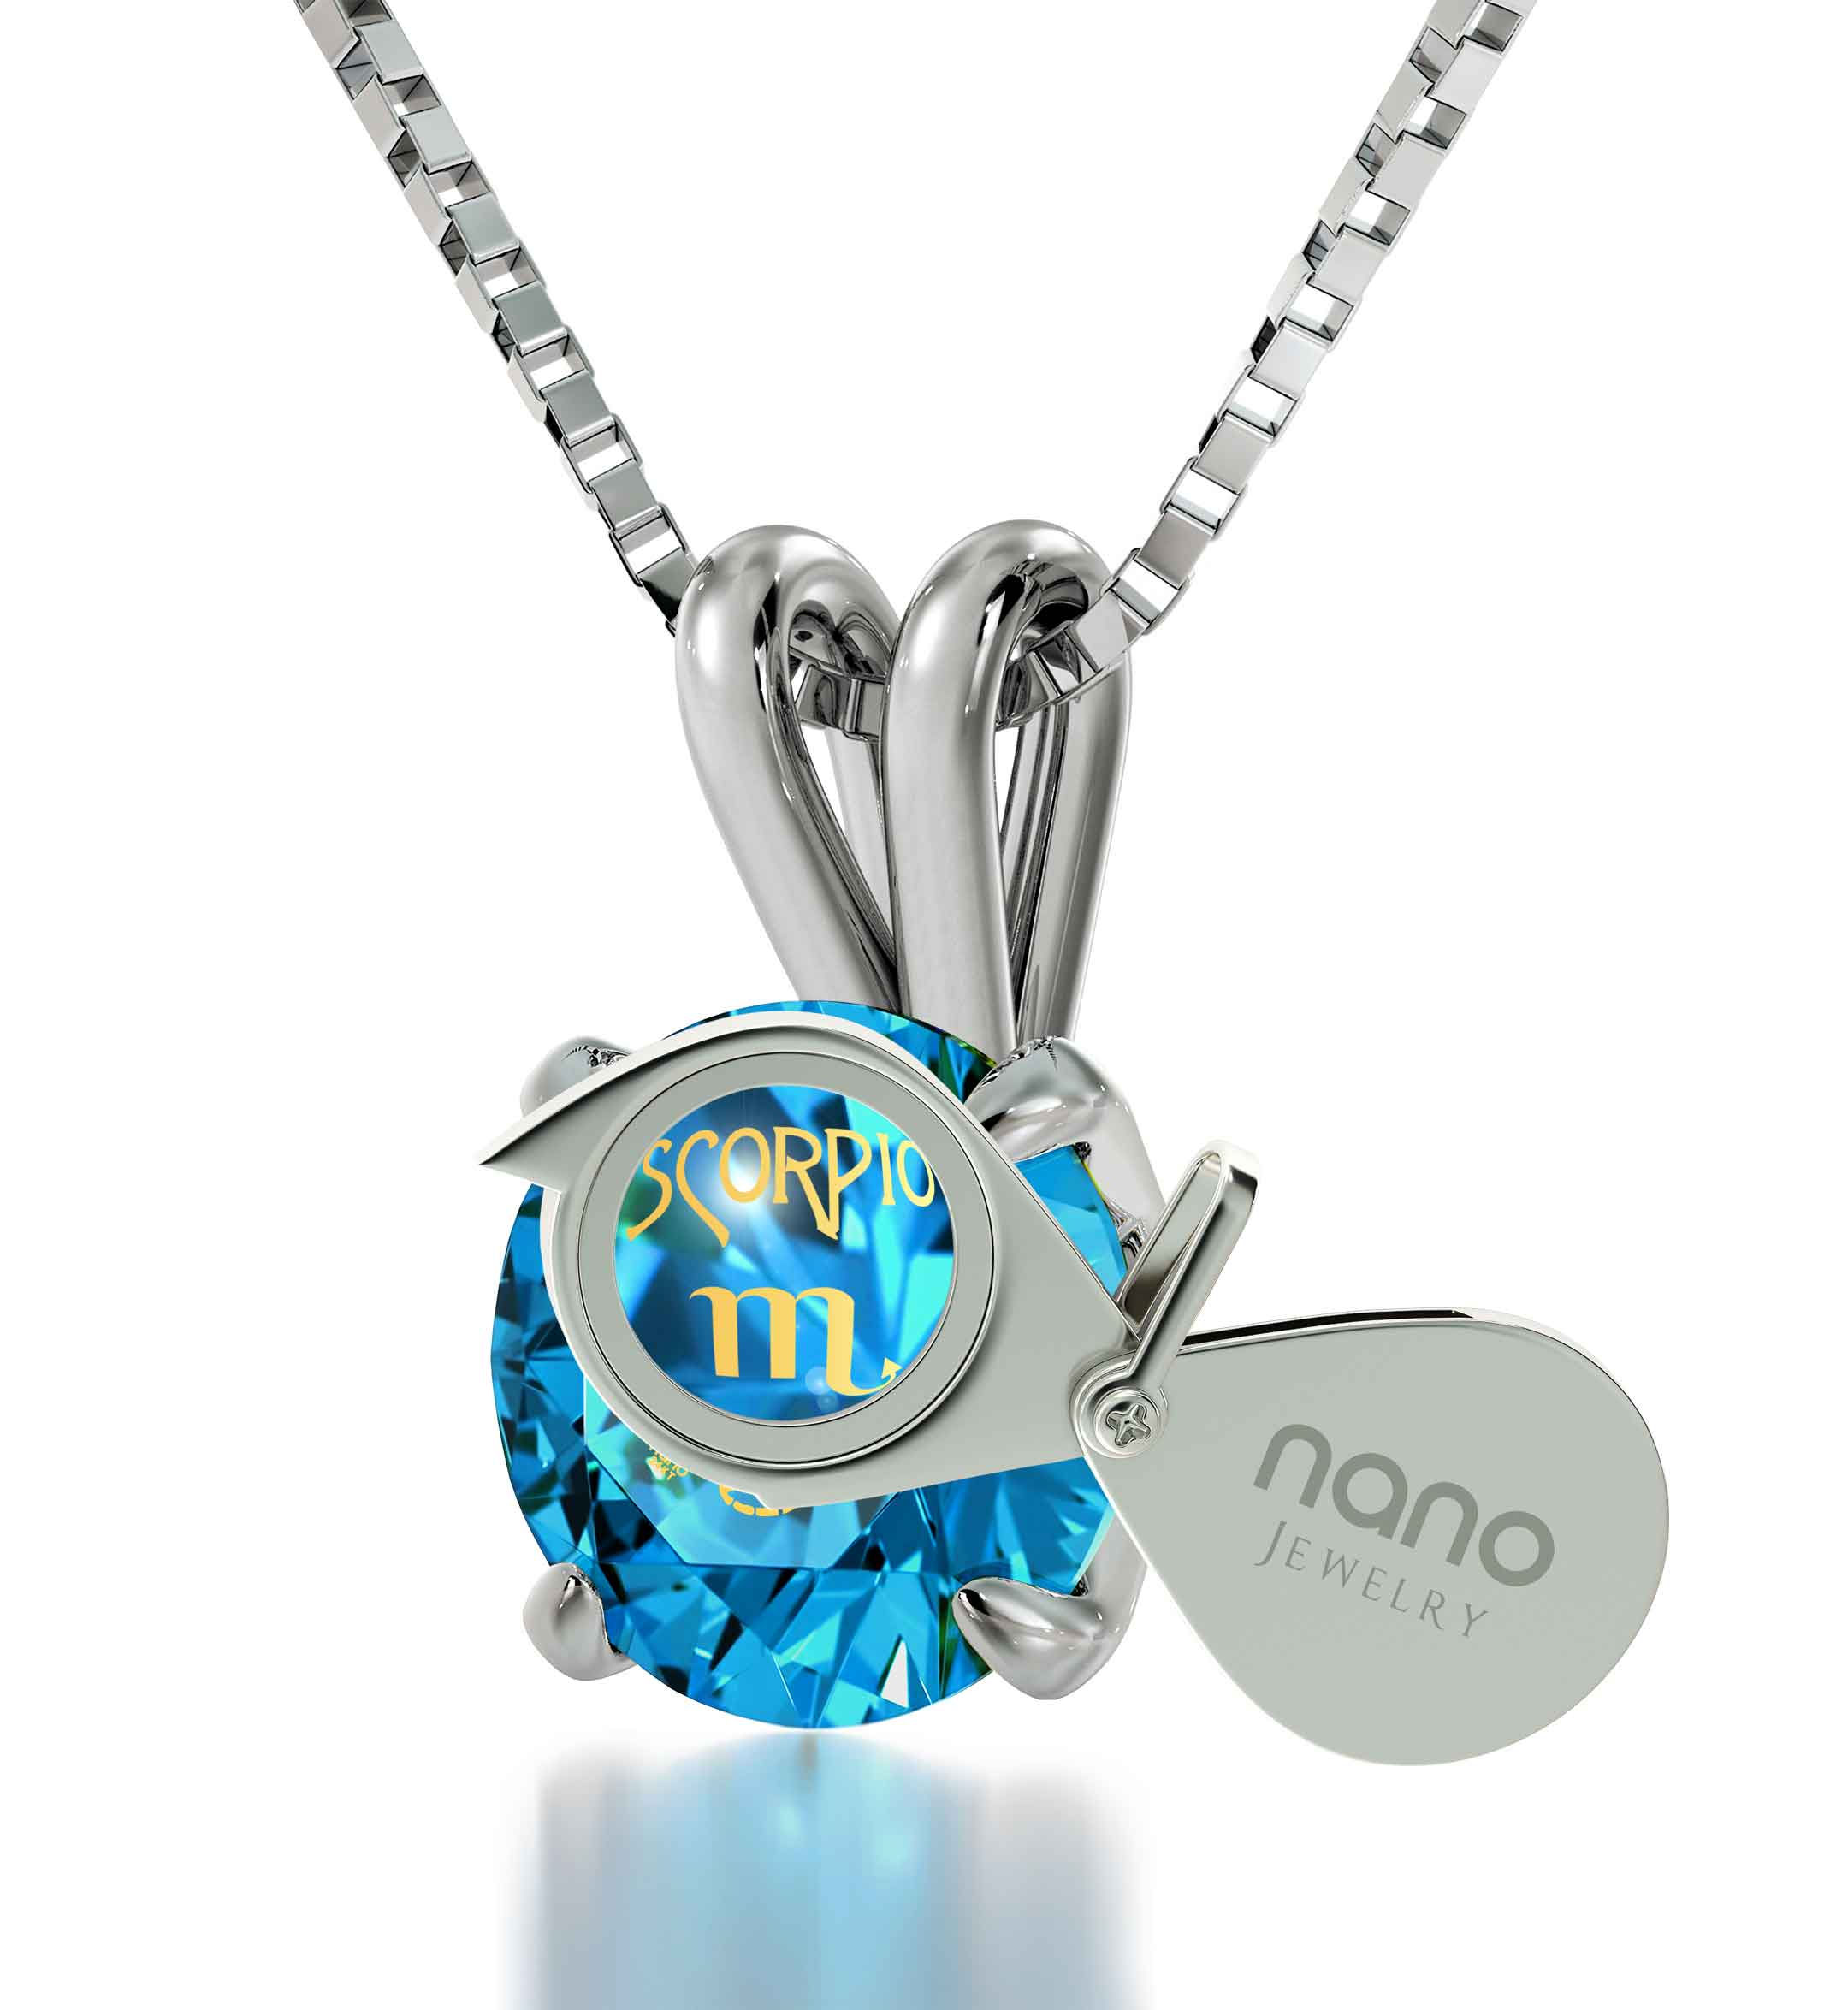 925 Sterling Silver Scorpio Necklace Zodiac Pendant with a Swarovski Crystal, attached to a sterling silver chain, featuring a small tag engraved with 'nano jewelry'.